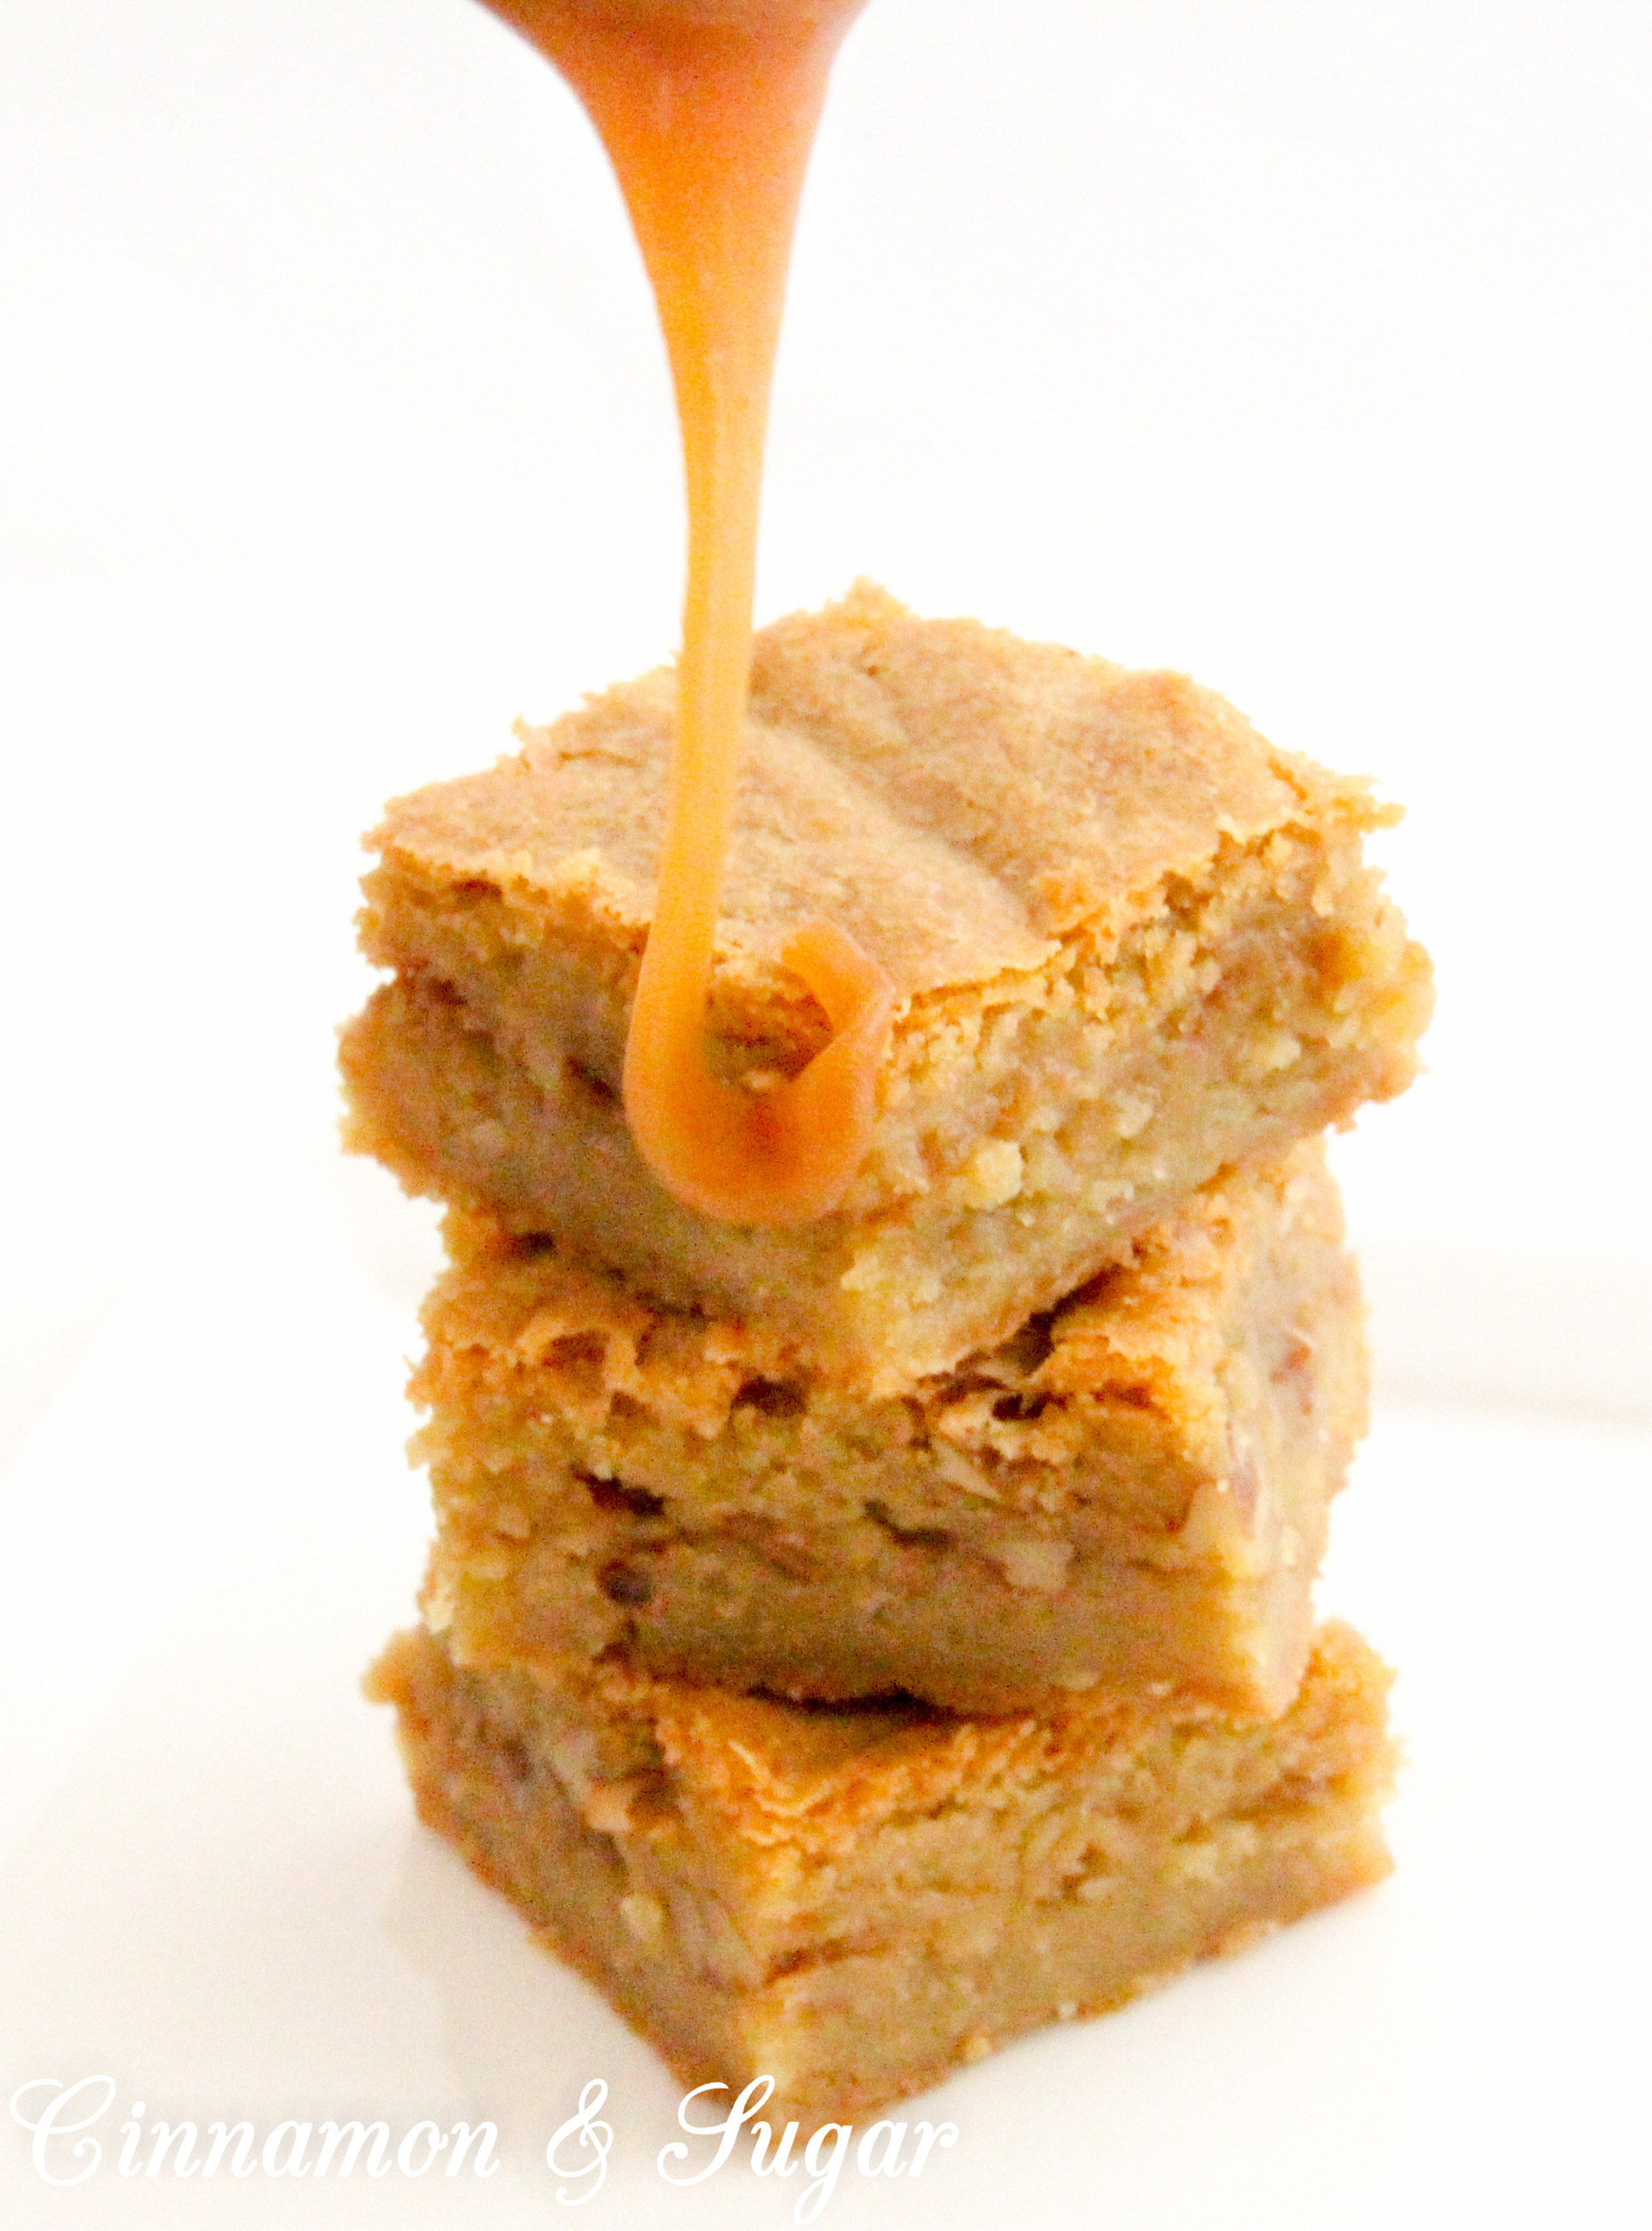 Caramel Blondies have a luscious layer of homemade salted caramel sauce and a generous sprinkle of chopped pecans between rich, buttery blondies. Recipe shared with permission granted by Daryl Wood Gerber, author of A SPRINKLING OF MURDER.